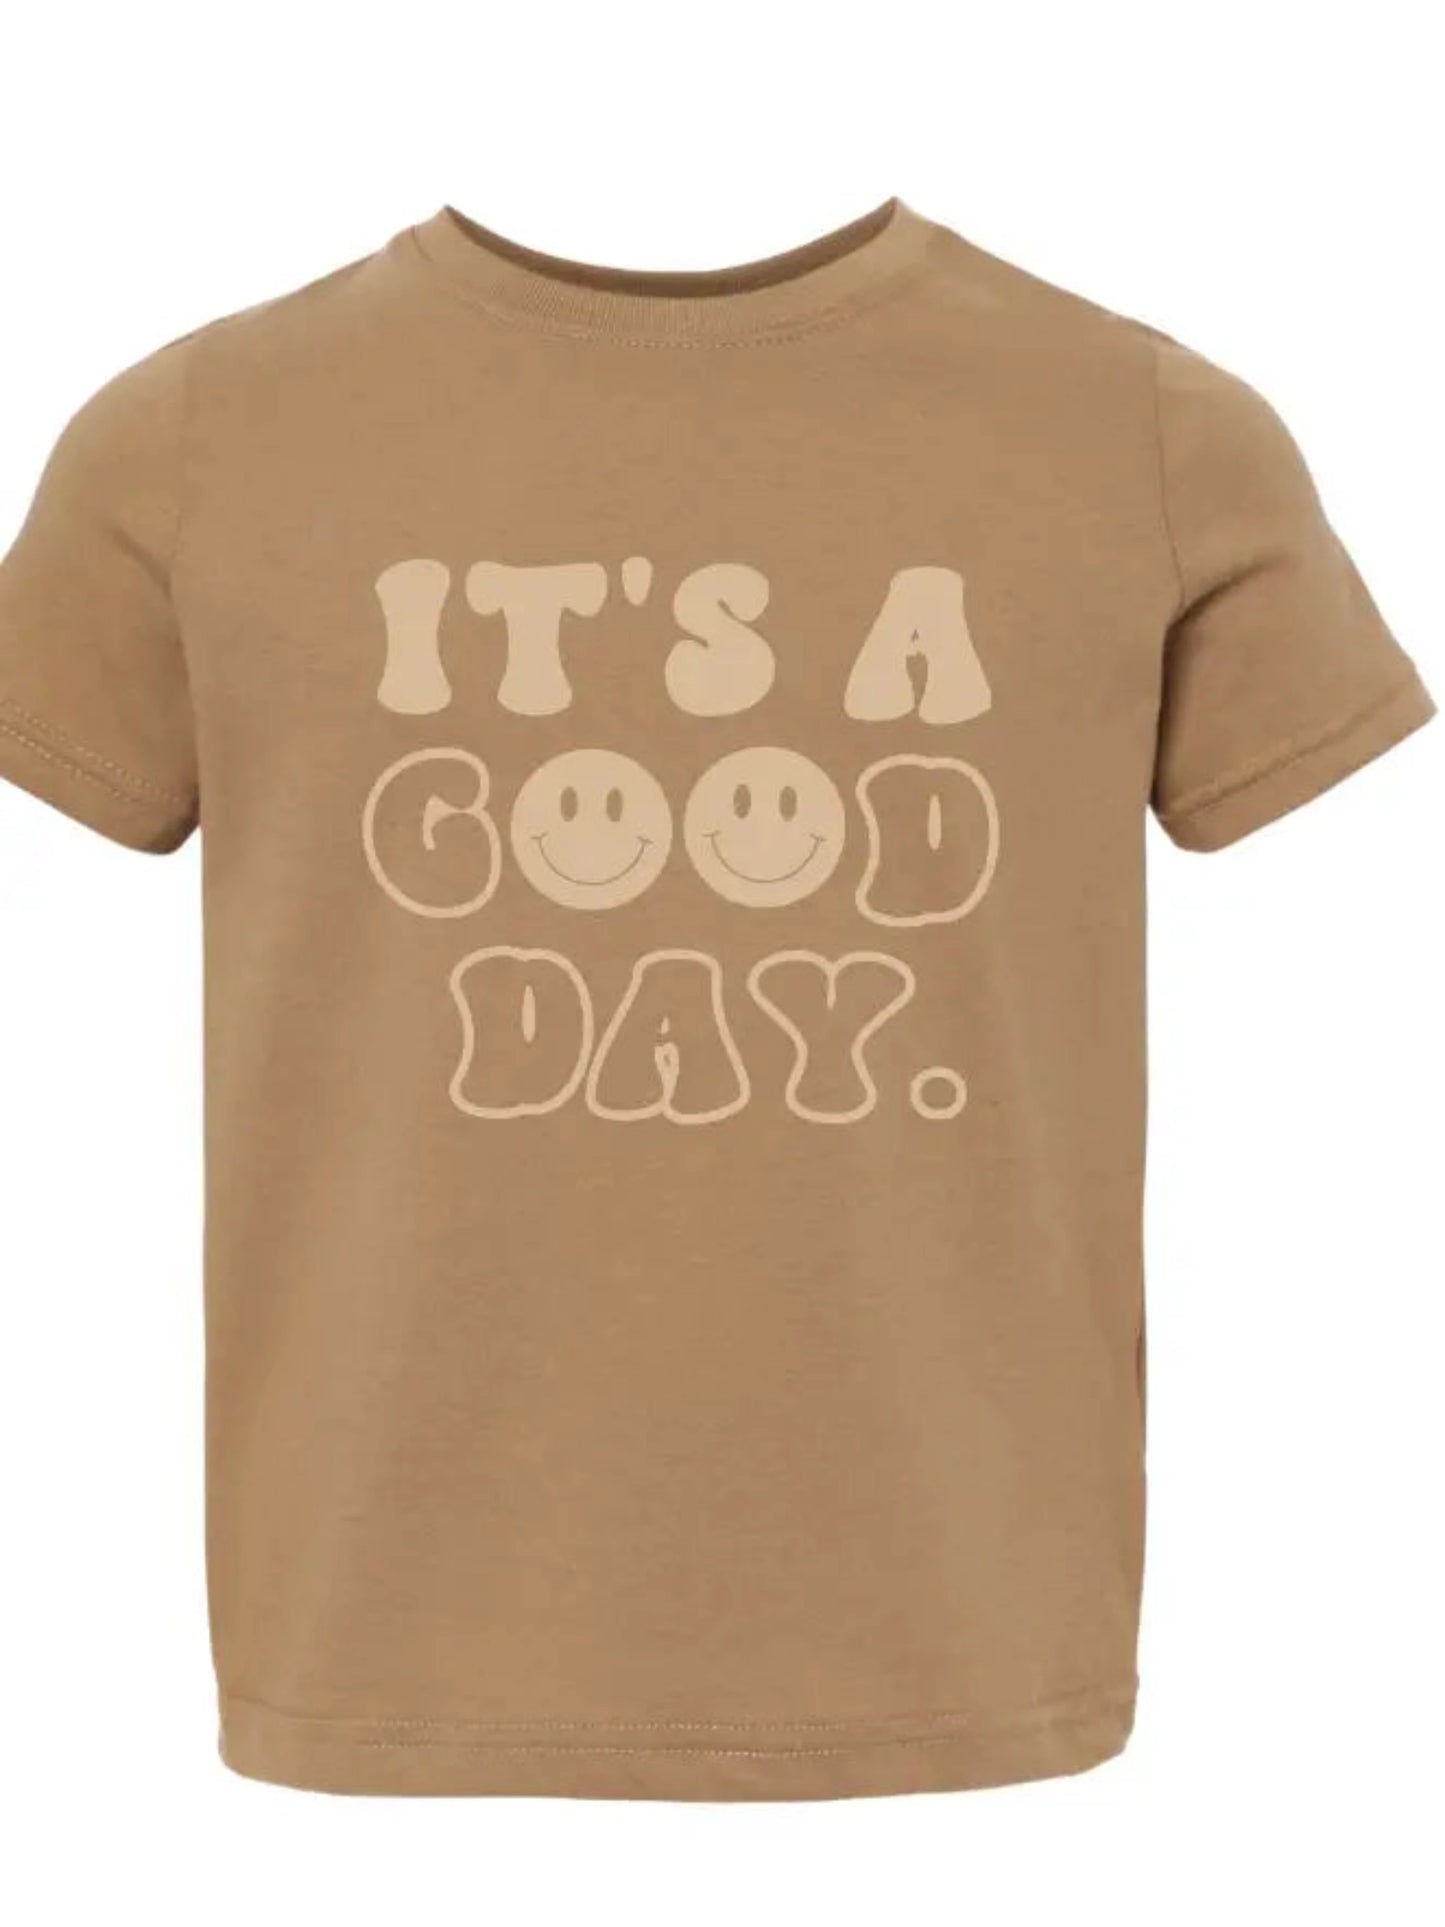 IT'S A GOOD DAY TEE